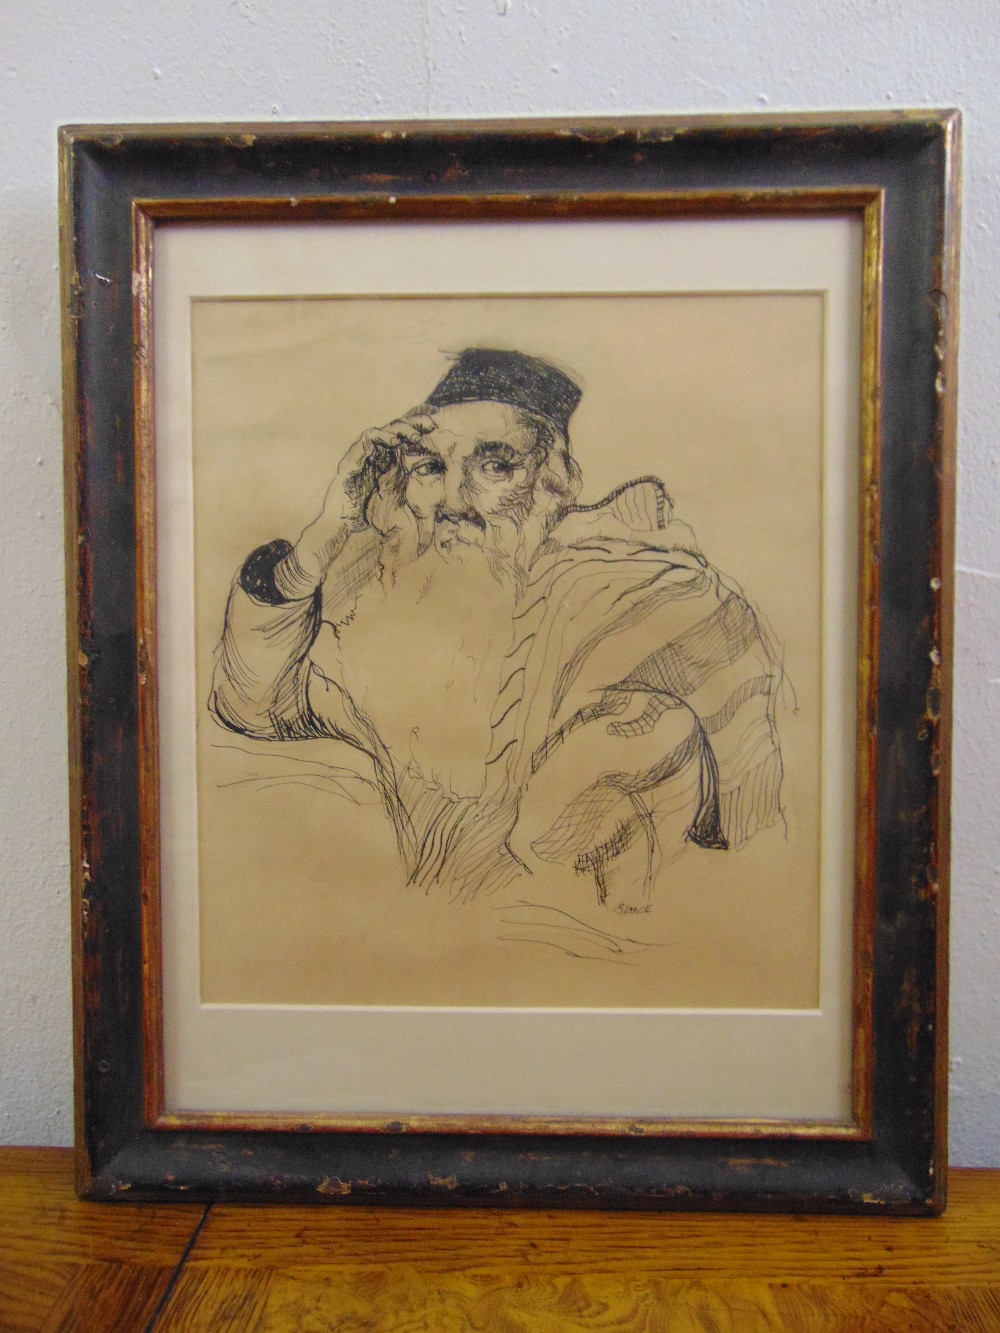 S. Lane framed and glazed monochromatic pen and ink drawing of a Rabbi, signed bottom right, 27 x